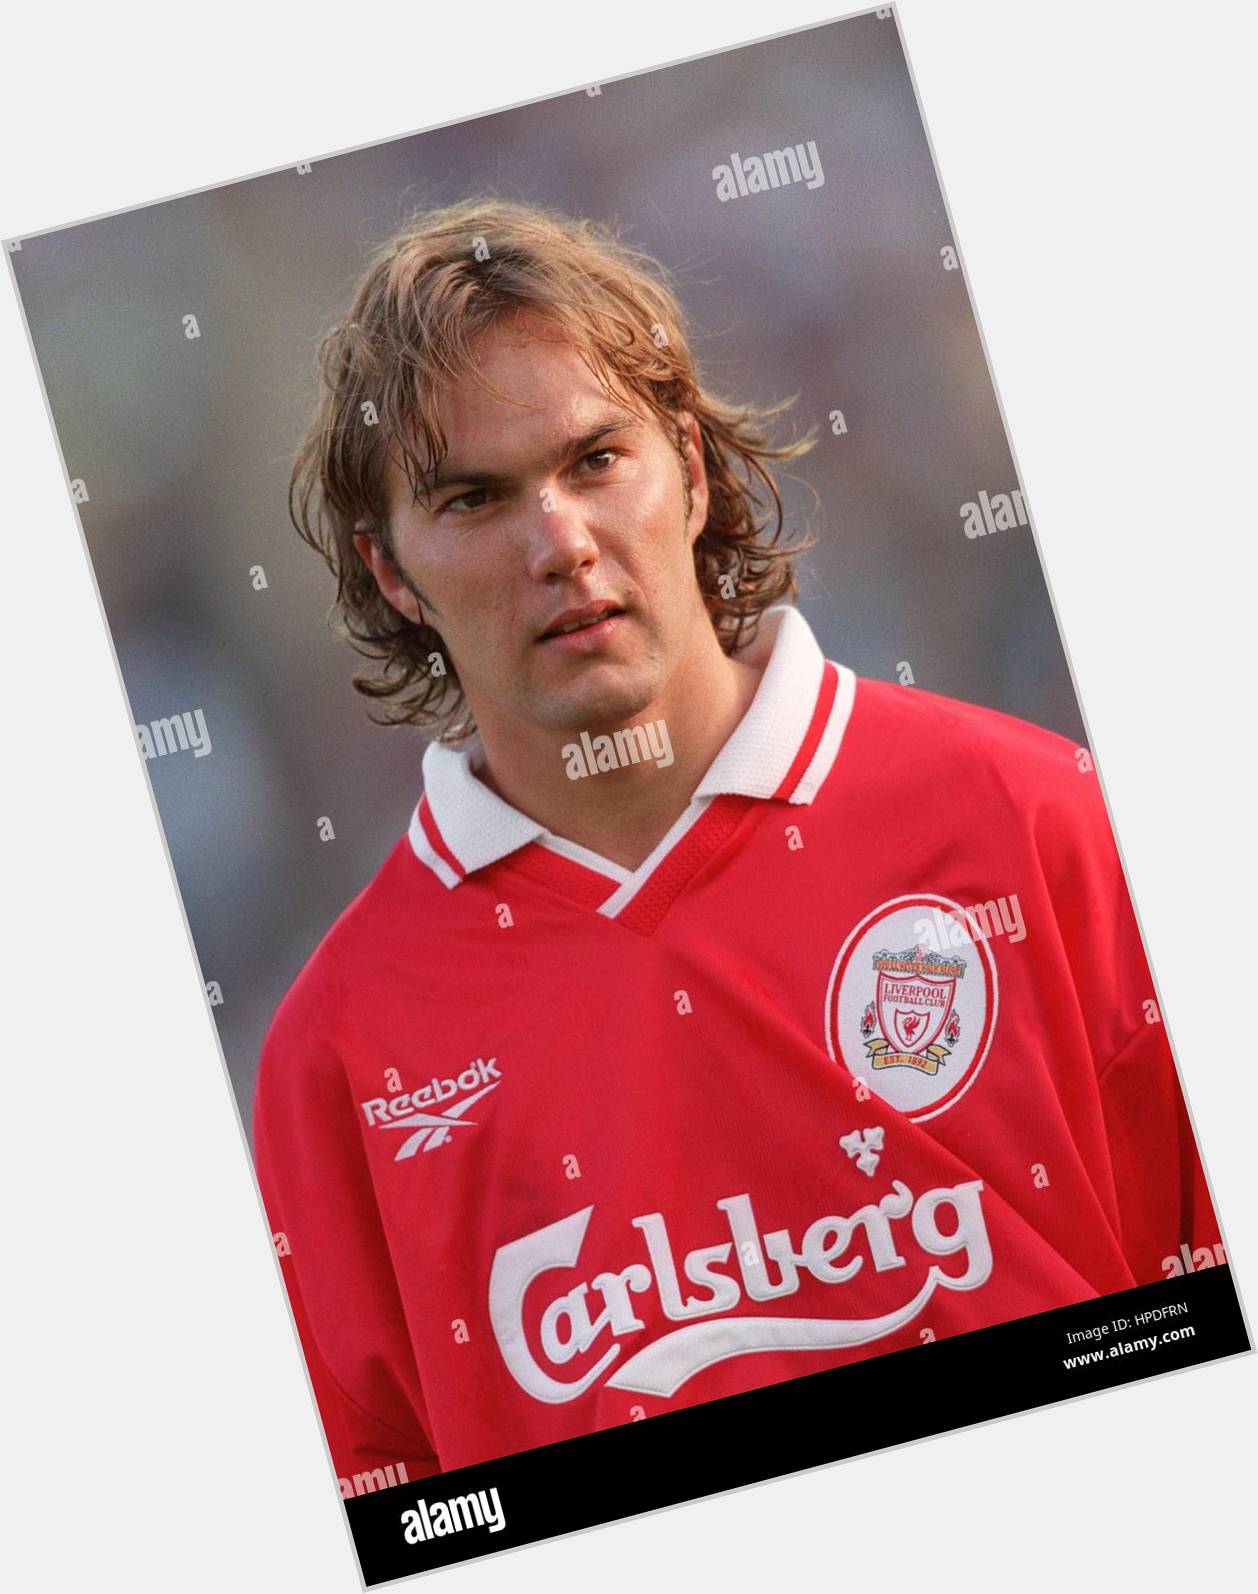 <a href="/hot-men/jason-mcateer/is-he-married-where-what-doing-now-why">Jason Mcateer</a>  